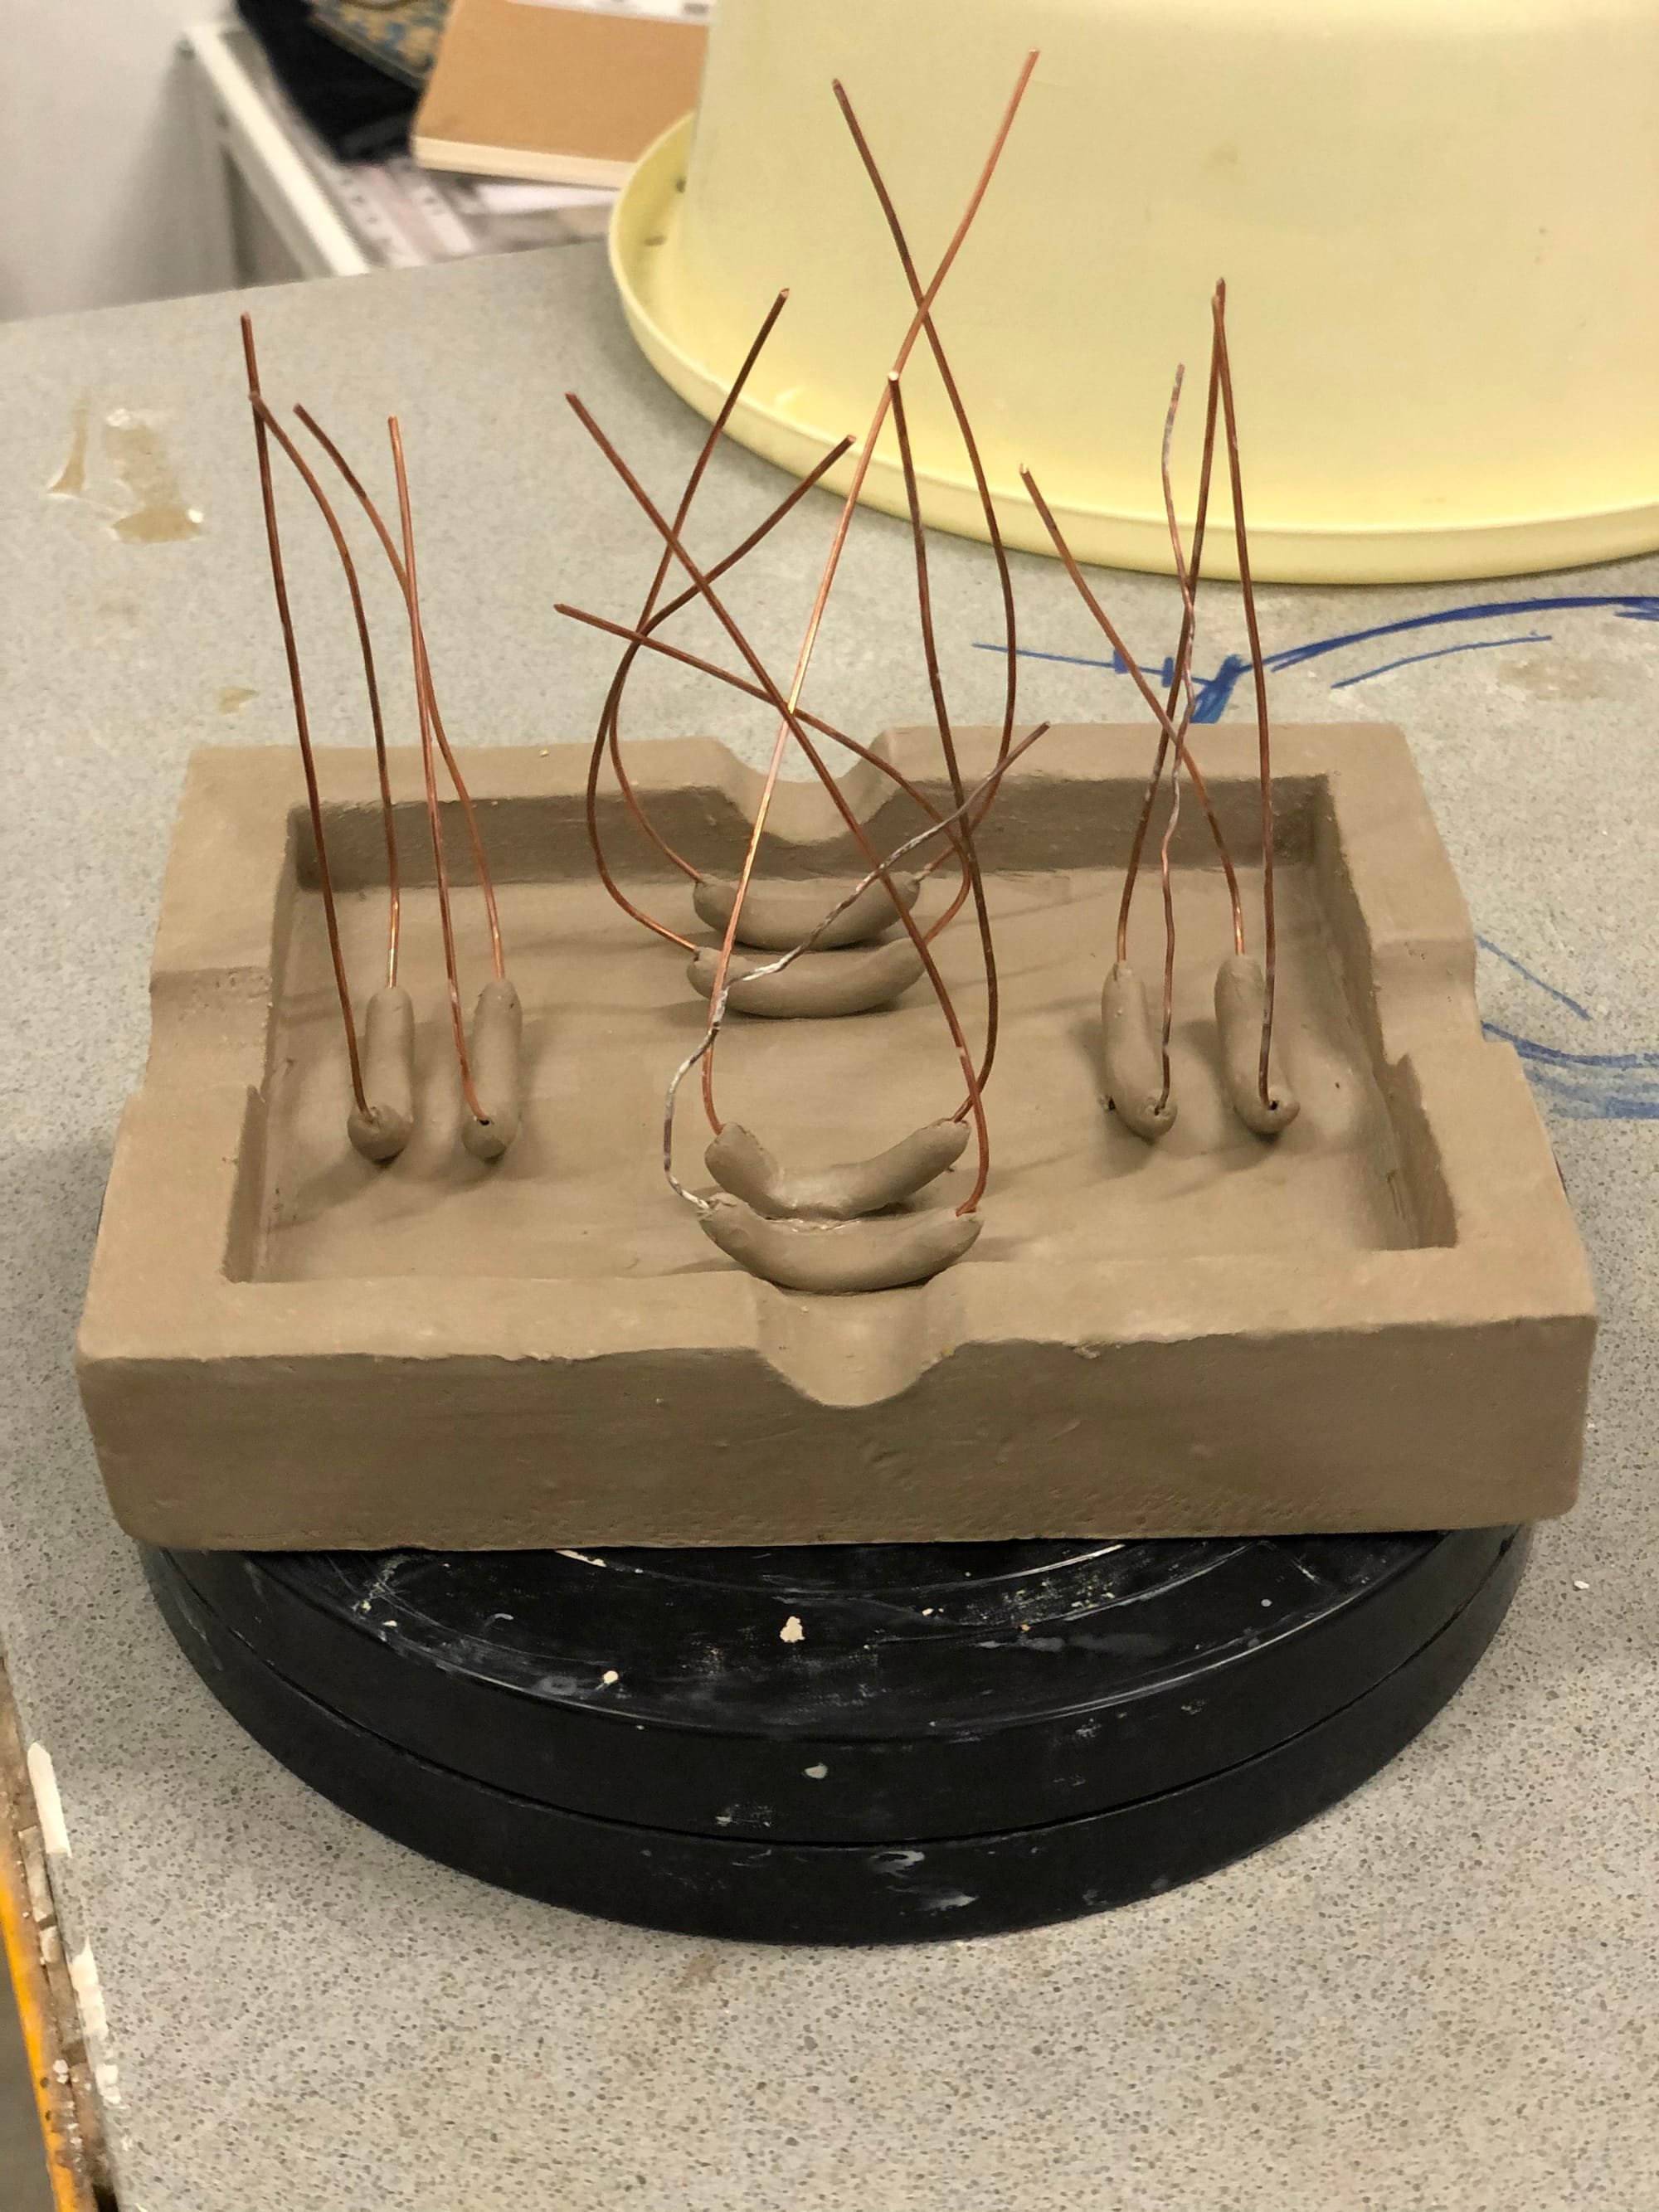 Clay model with vents